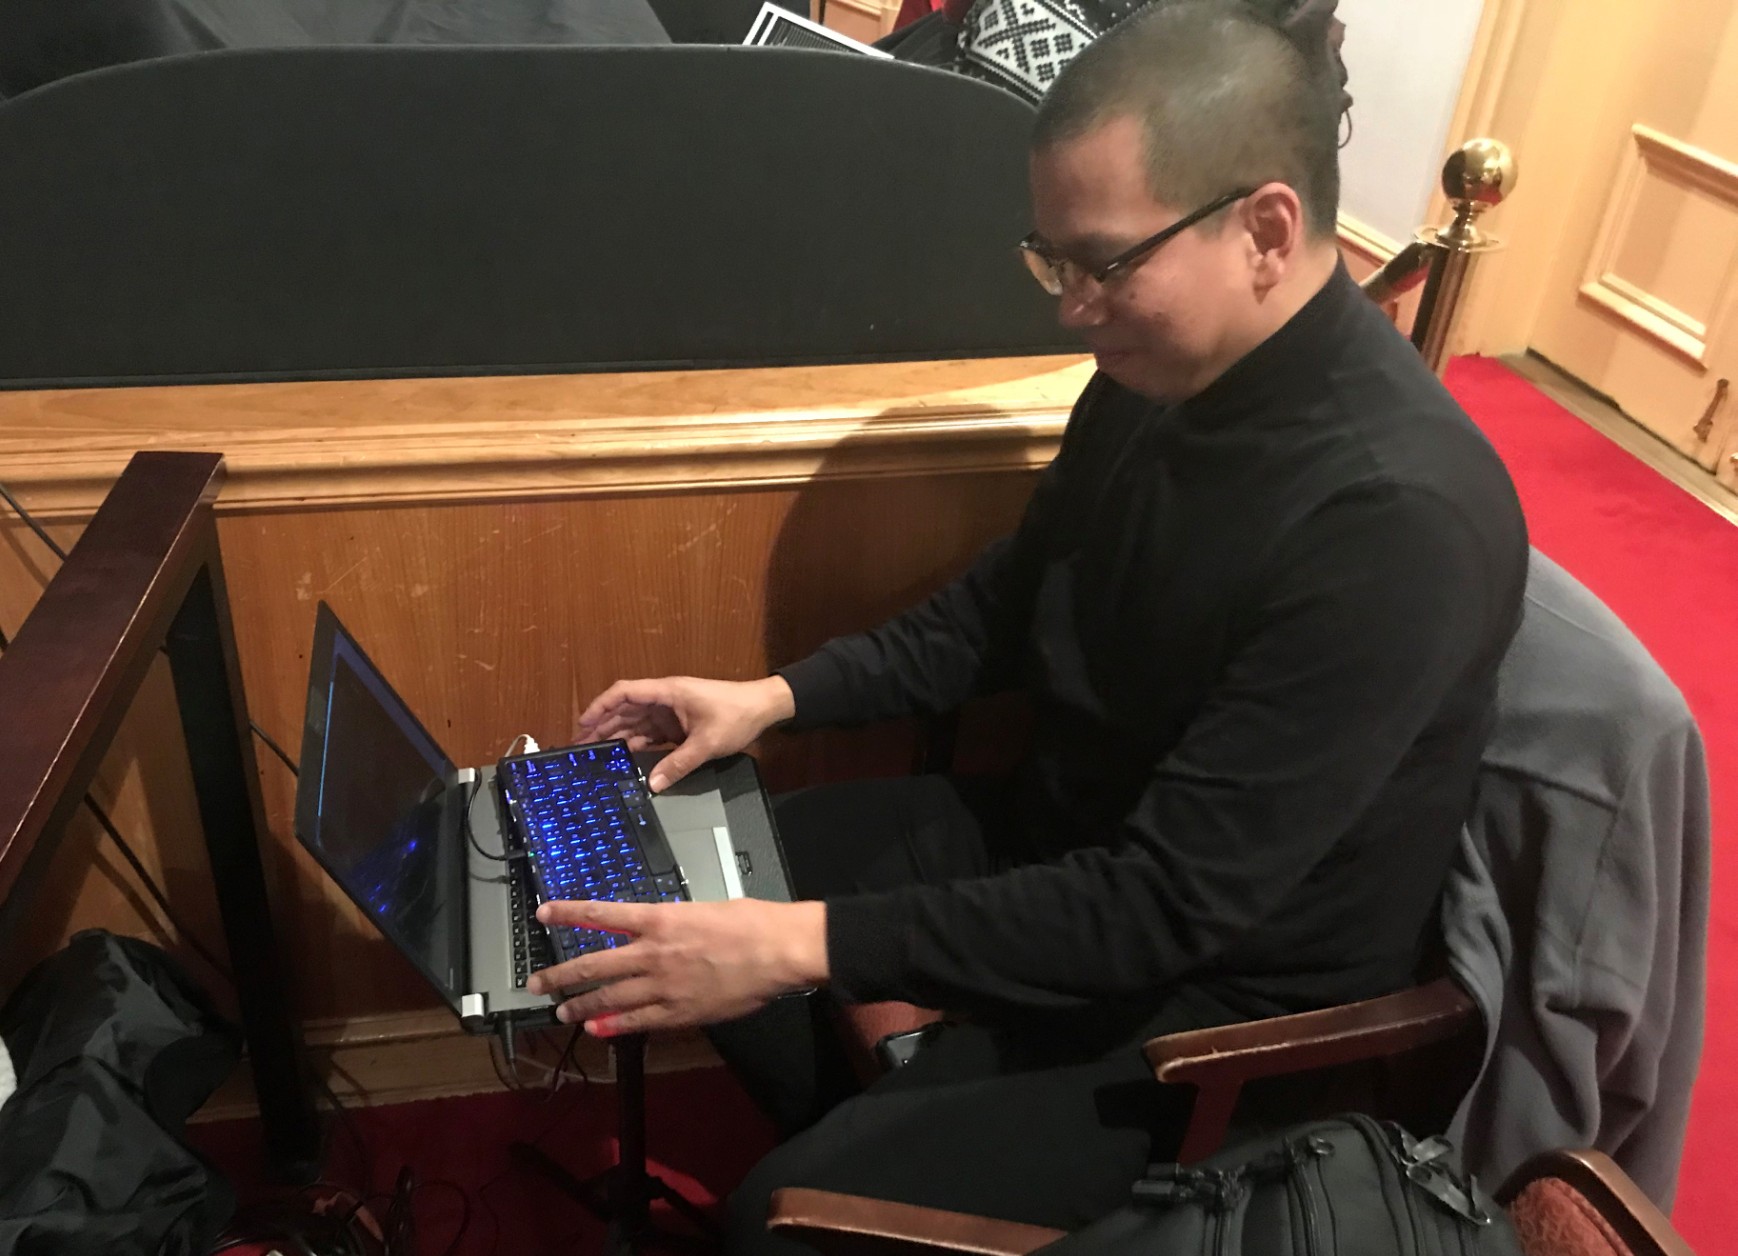 David Chu sits in the back of the orchestra section at Ford's Theatre typing onto a small devices captions which will play during a performance of "Twelve Angry Men"